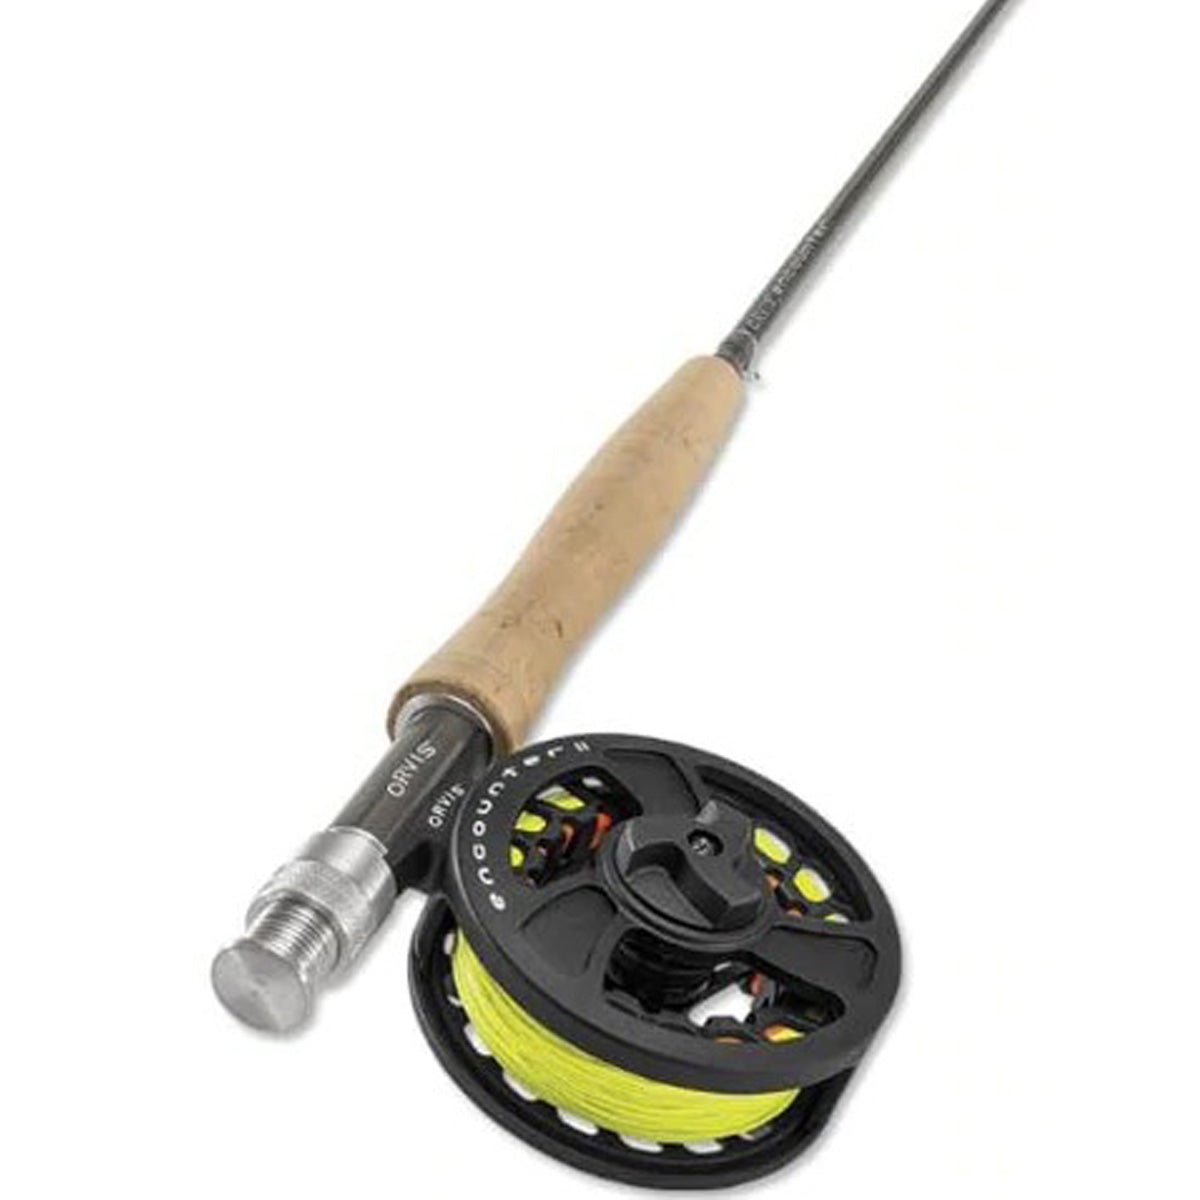 The Orvis Encounter Fly Rod Outfit which is the Reel with spooled with a yellow fly line and the reel is attached to the encounter fly rod